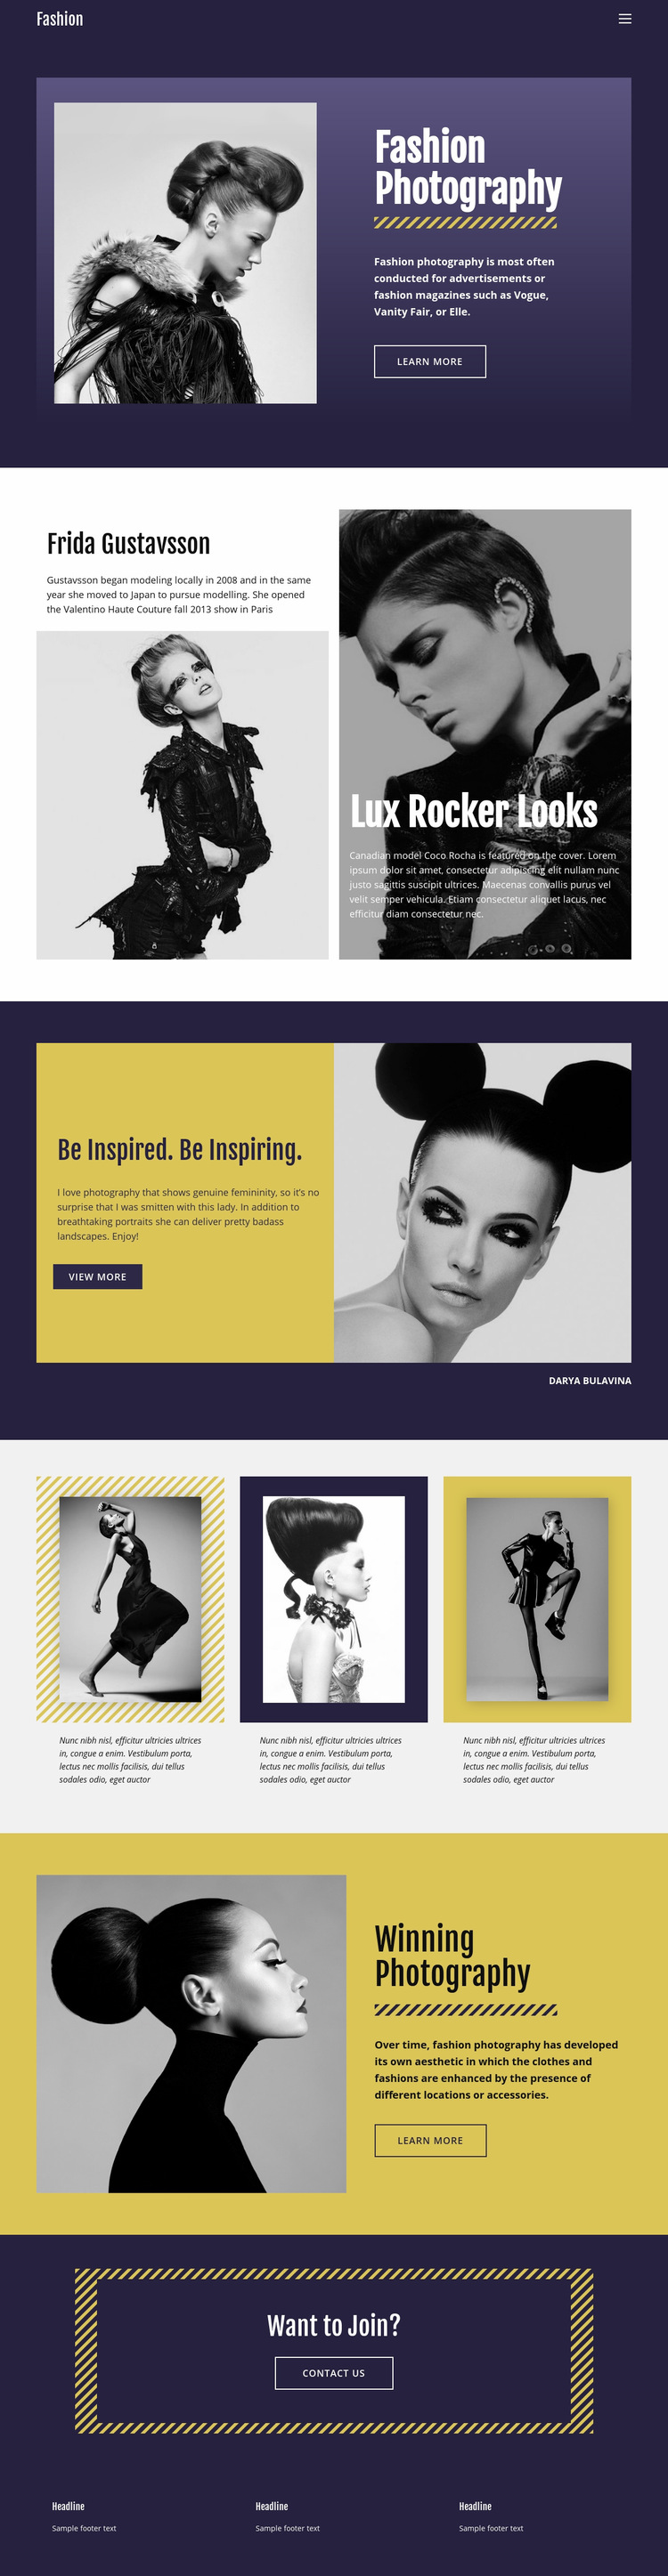 Fashion Photography Classic Style Web Page Design